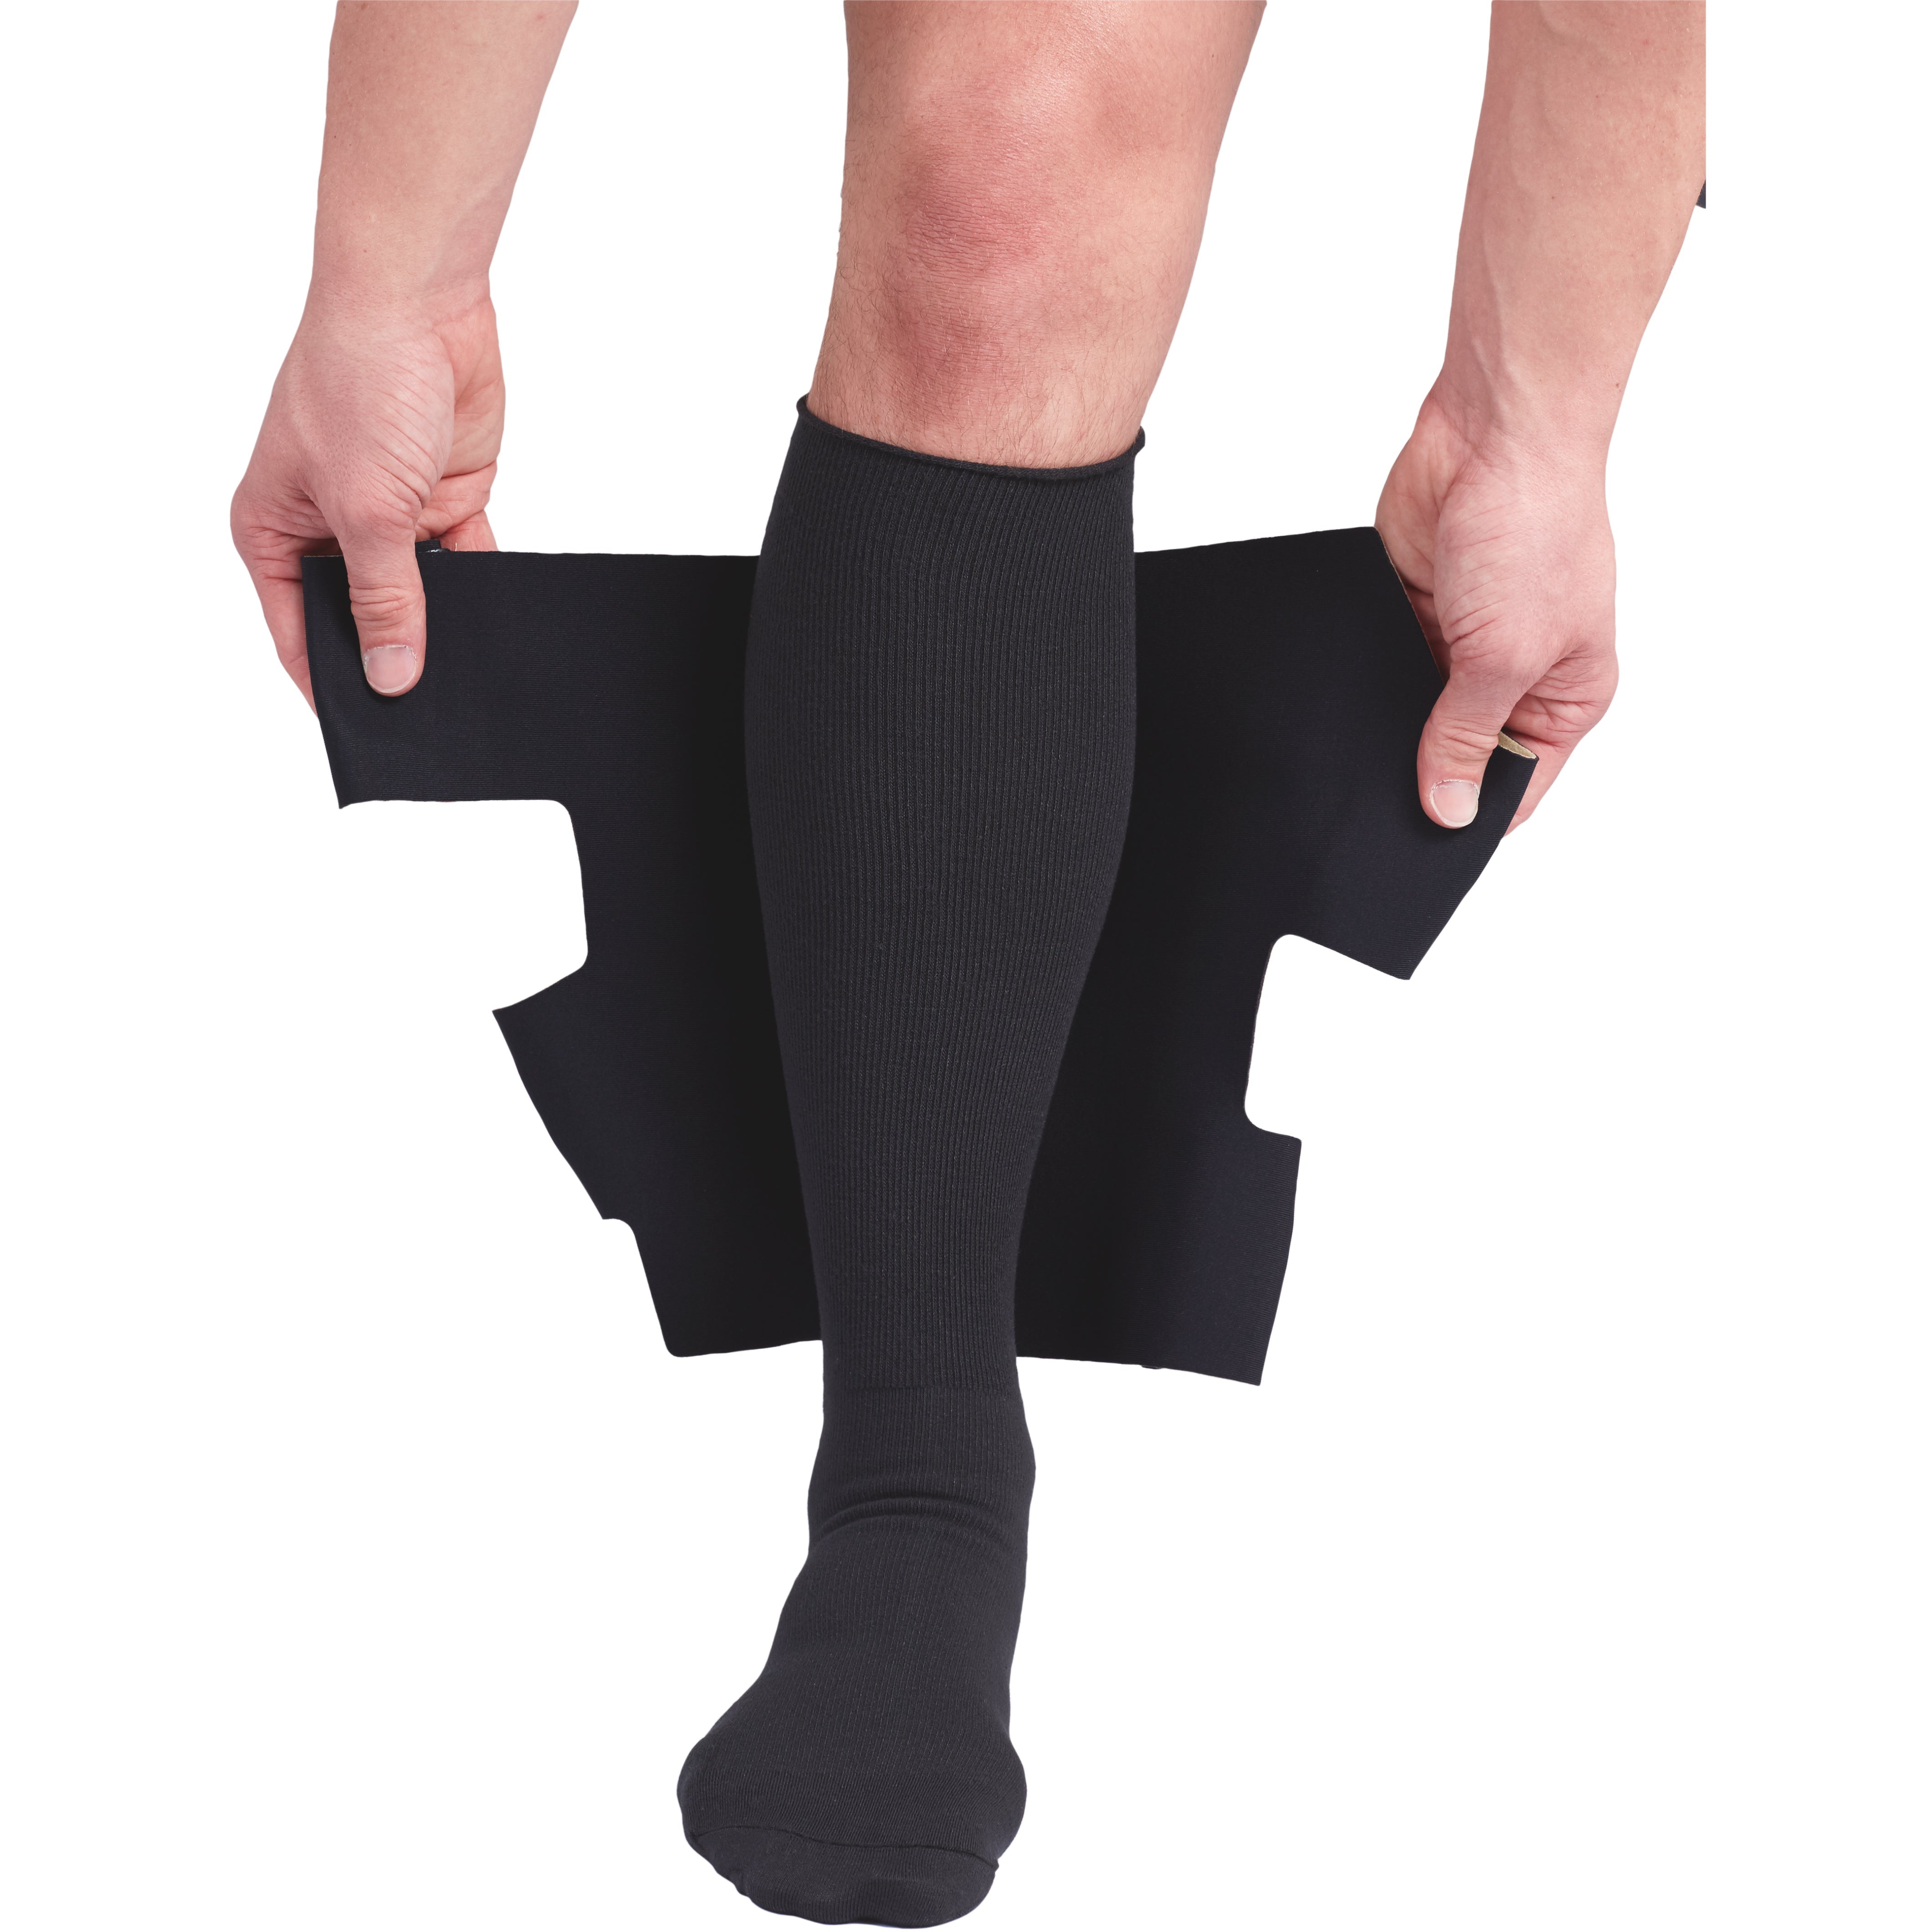 Circaid Silver Undersleeves — Compression Care Center